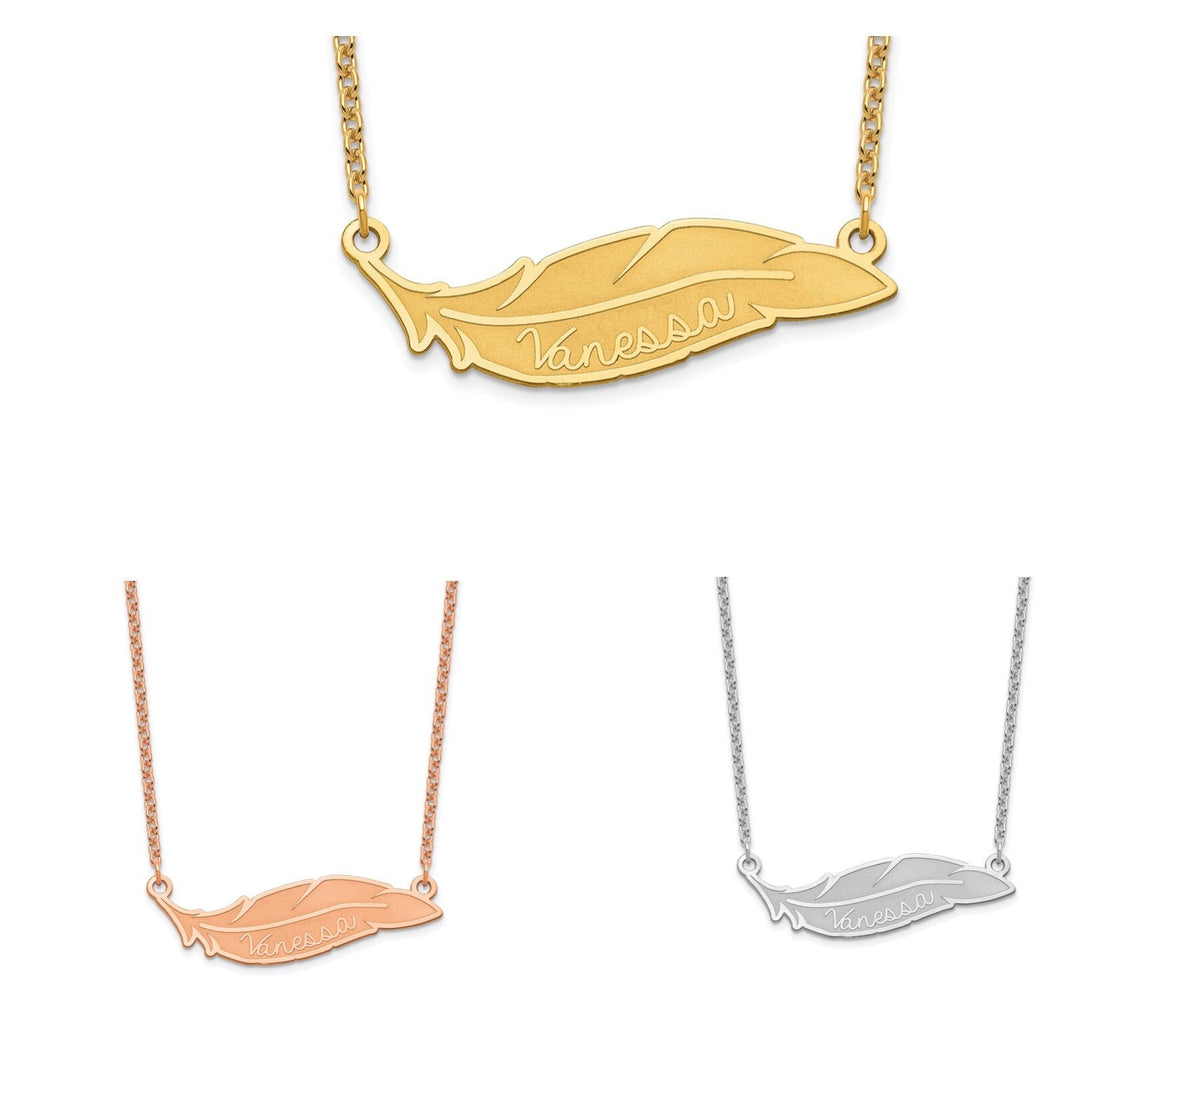 Personalized Feather Name Necklace in Sterling Silver, 10k, or 14k Gold Chain  (1.55 inches wide) Gift Box Included Made in USA